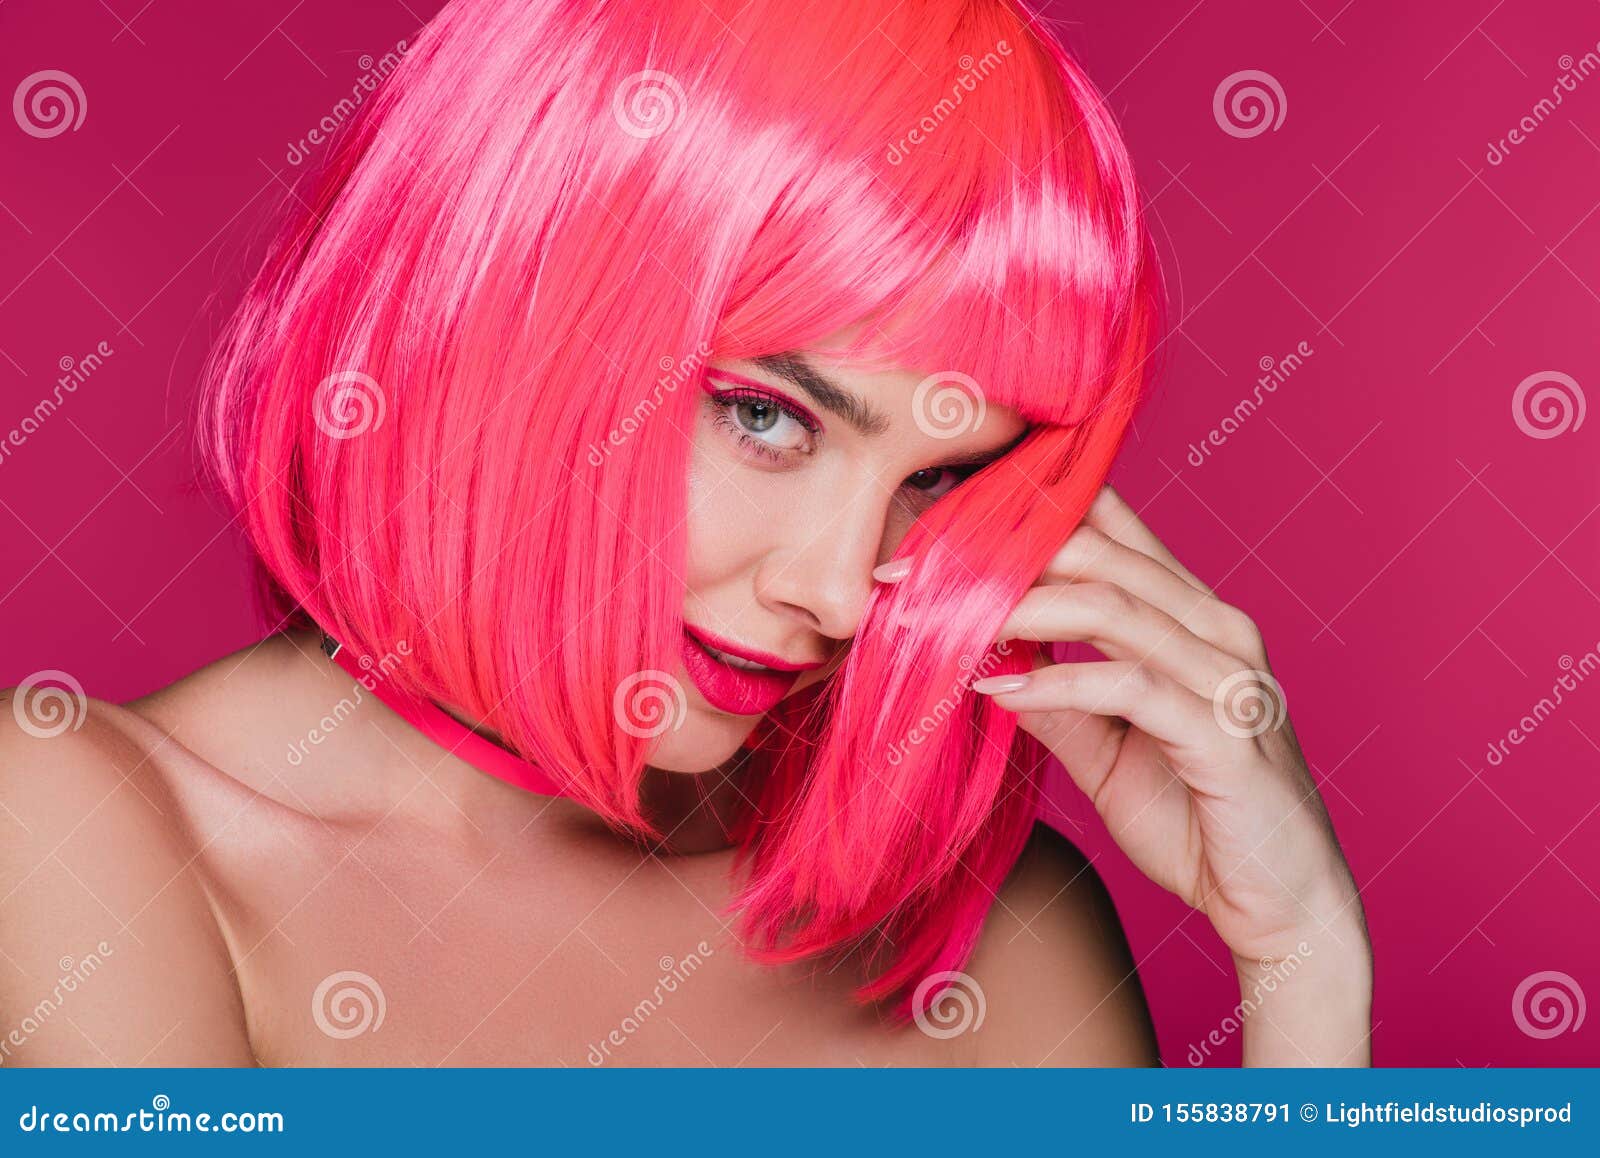 Fashionable Naked Girl Posing In Neon Pink Wig Isolated Stock Image 